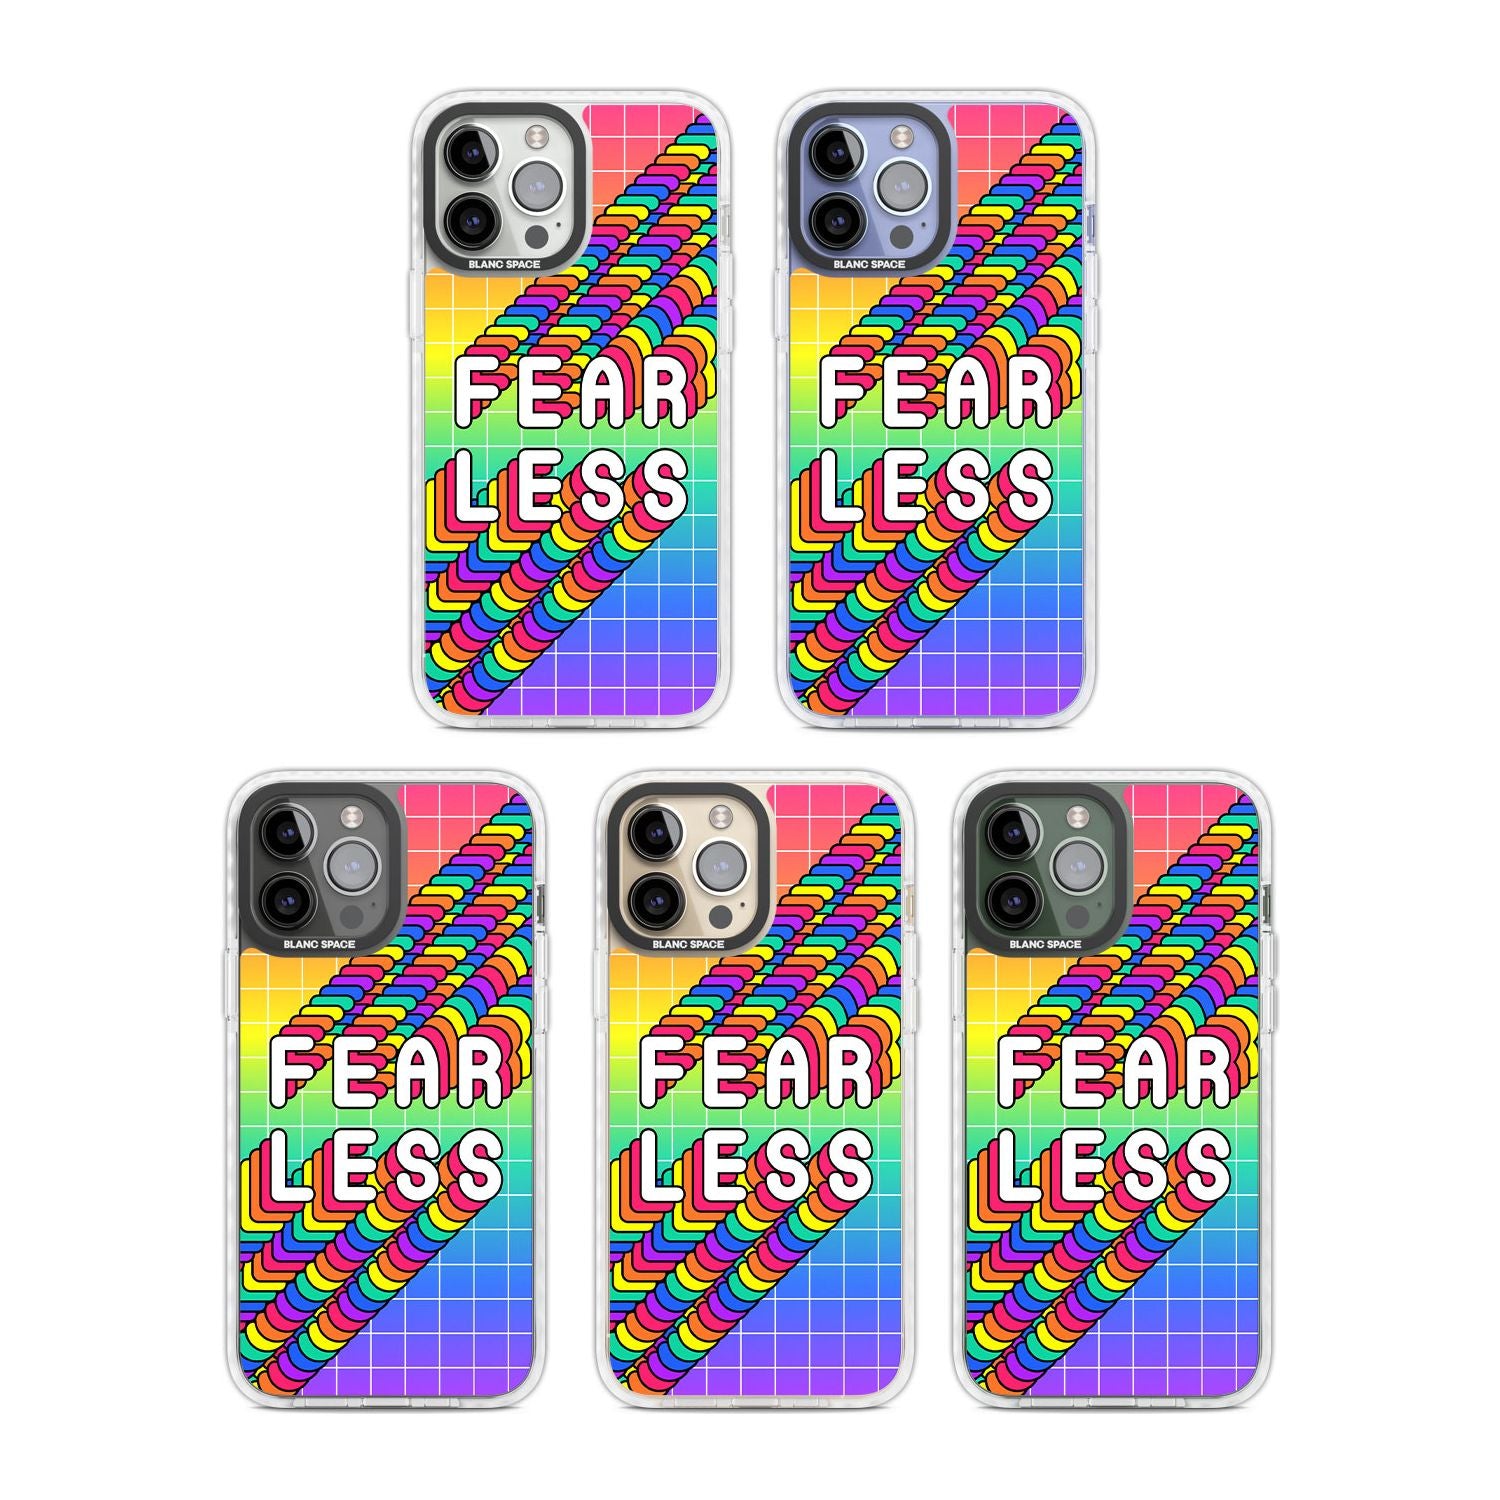 Fearless Phone Case iPhone 15 Pro Max / Black Impact Case,iPhone 15 Plus / Black Impact Case,iPhone 15 Pro / Black Impact Case,iPhone 15 / Black Impact Case,iPhone 15 Pro Max / Impact Case,iPhone 15 Plus / Impact Case,iPhone 15 Pro / Impact Case,iPhone 15 / Impact Case,iPhone 15 Pro Max / Magsafe Black Impact Case,iPhone 15 Plus / Magsafe Black Impact Case,iPhone 15 Pro / Magsafe Black Impact Case,iPhone 15 / Magsafe Black Impact Case,iPhone 14 Pro Max / Black Impact Case,iPhone 14 Plus / Black Impact Case,